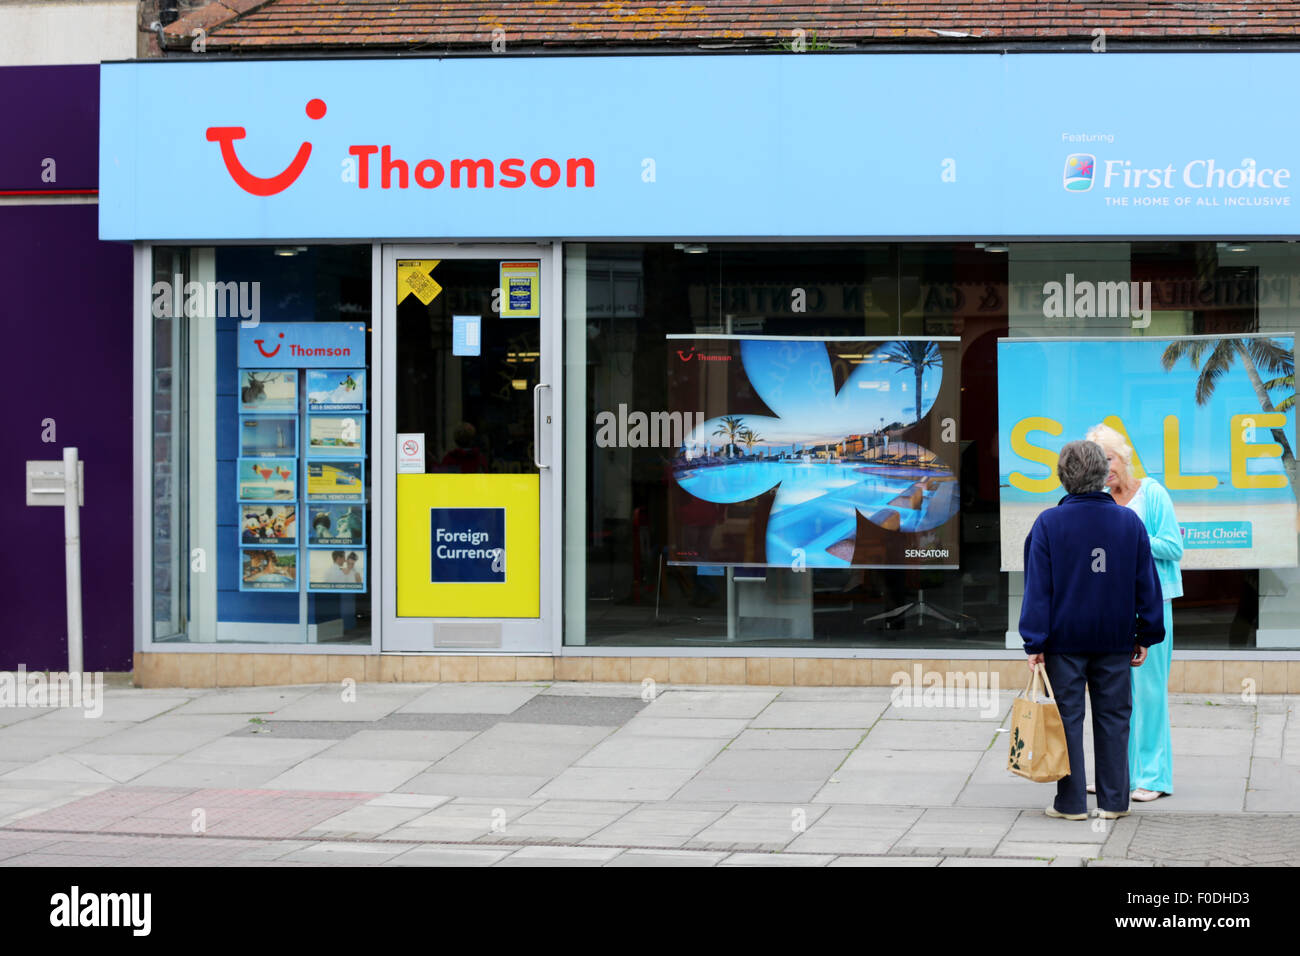 A Thomson, First Choice, TUI travel agency shop on a High St in a typical British Town. The shops give the company a shop front presence as well as providing a booking service for those not willing to use the internet. Stock Photo